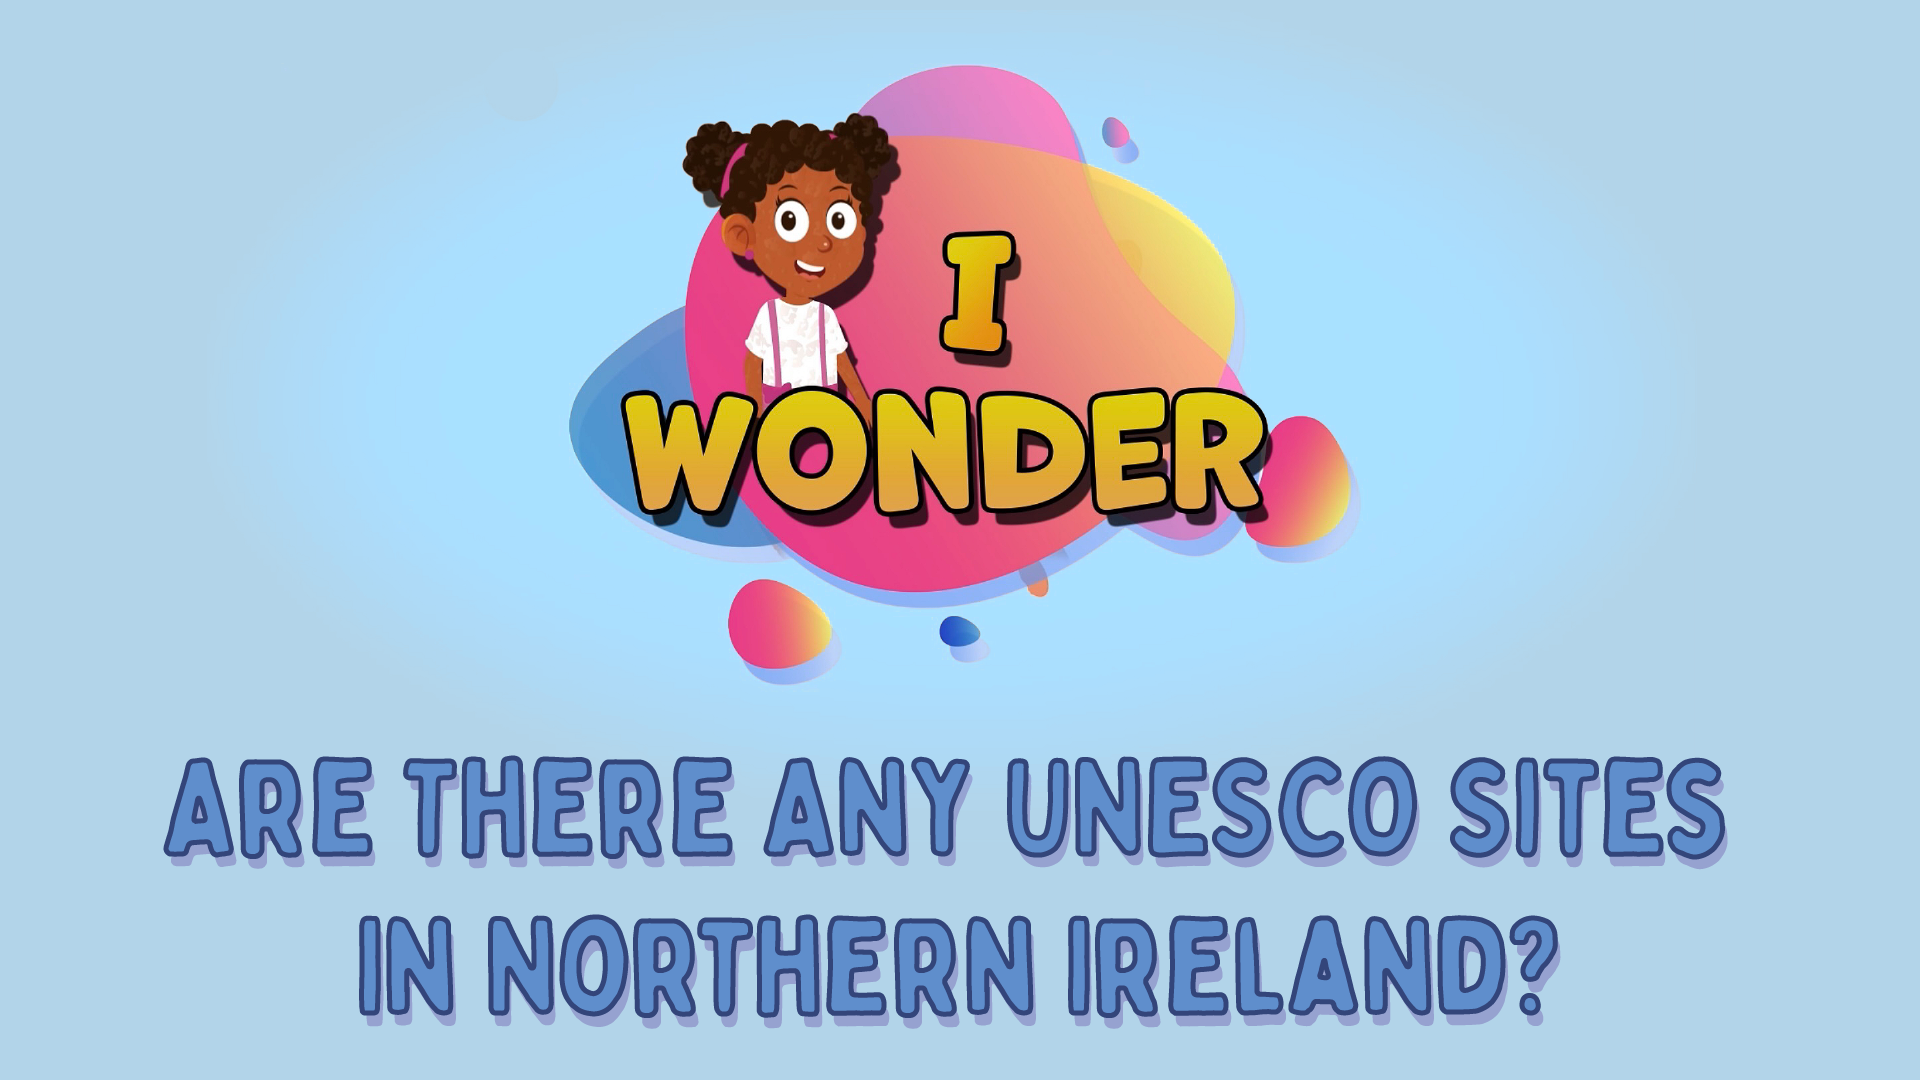 Are There Any UNESCO Sites In Northern Ireland?